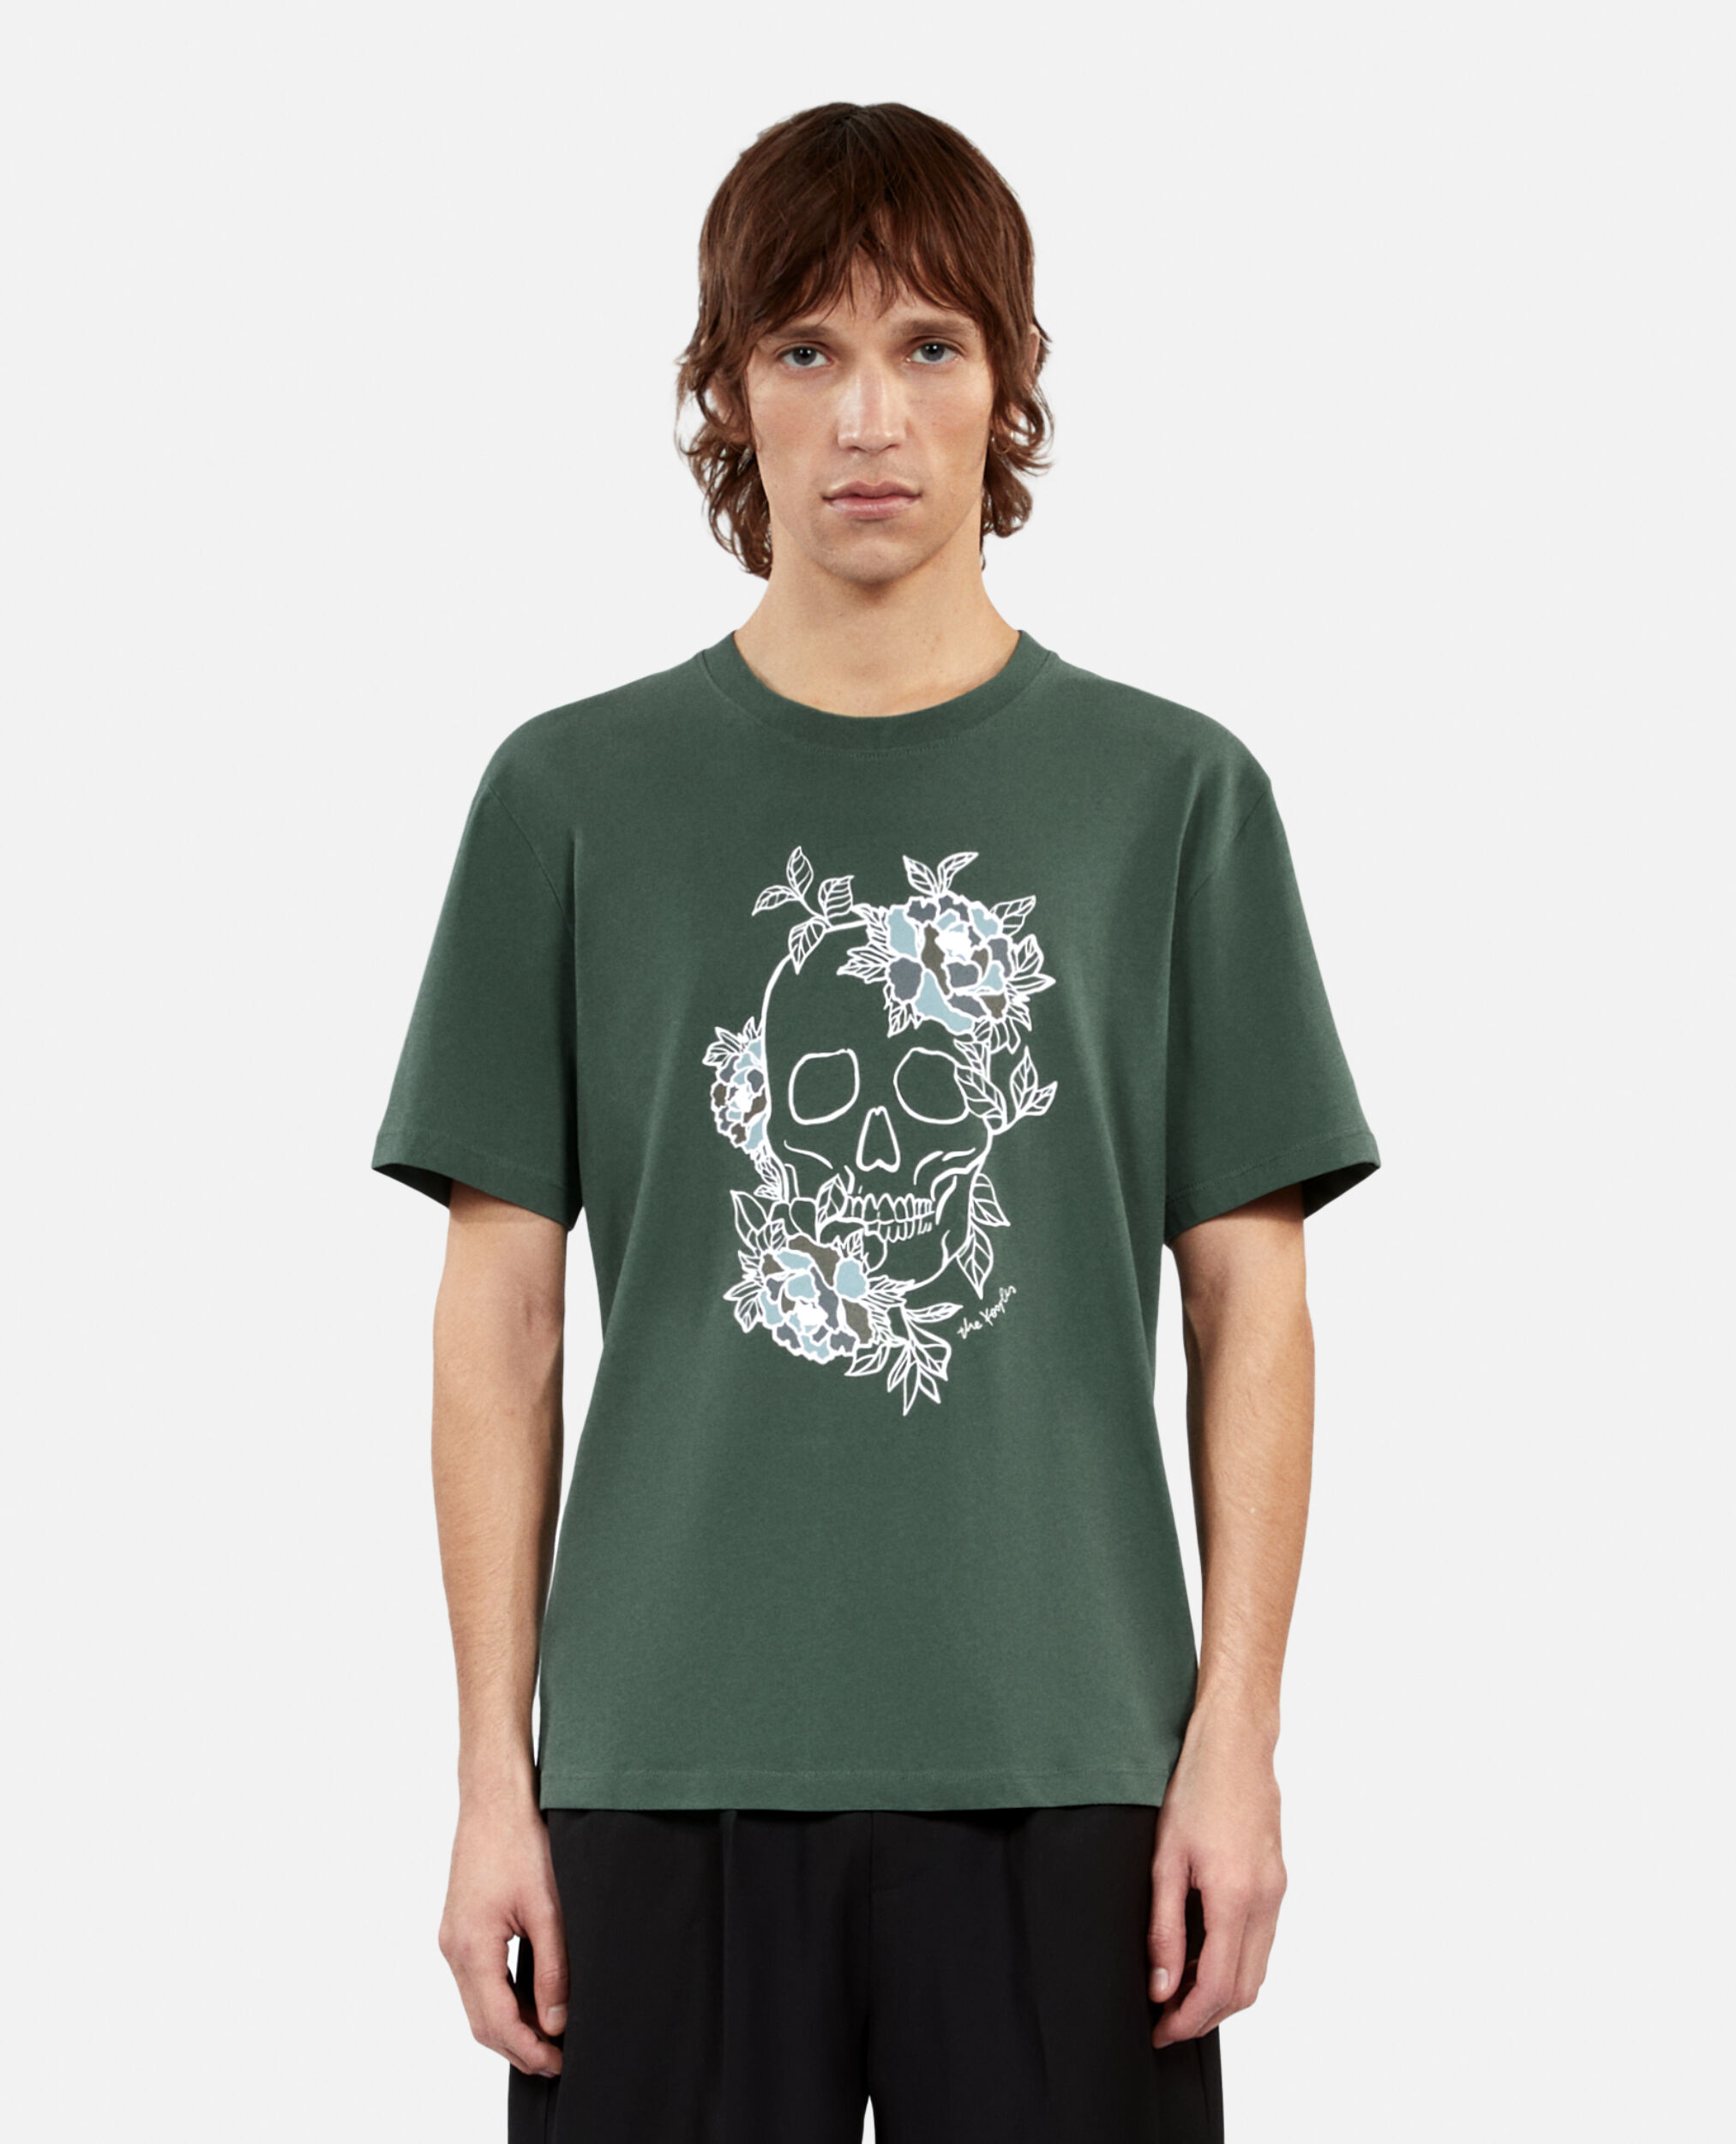 Men's green t-shirt with Flower skull serigraphy, FOREST, hi-res image number null